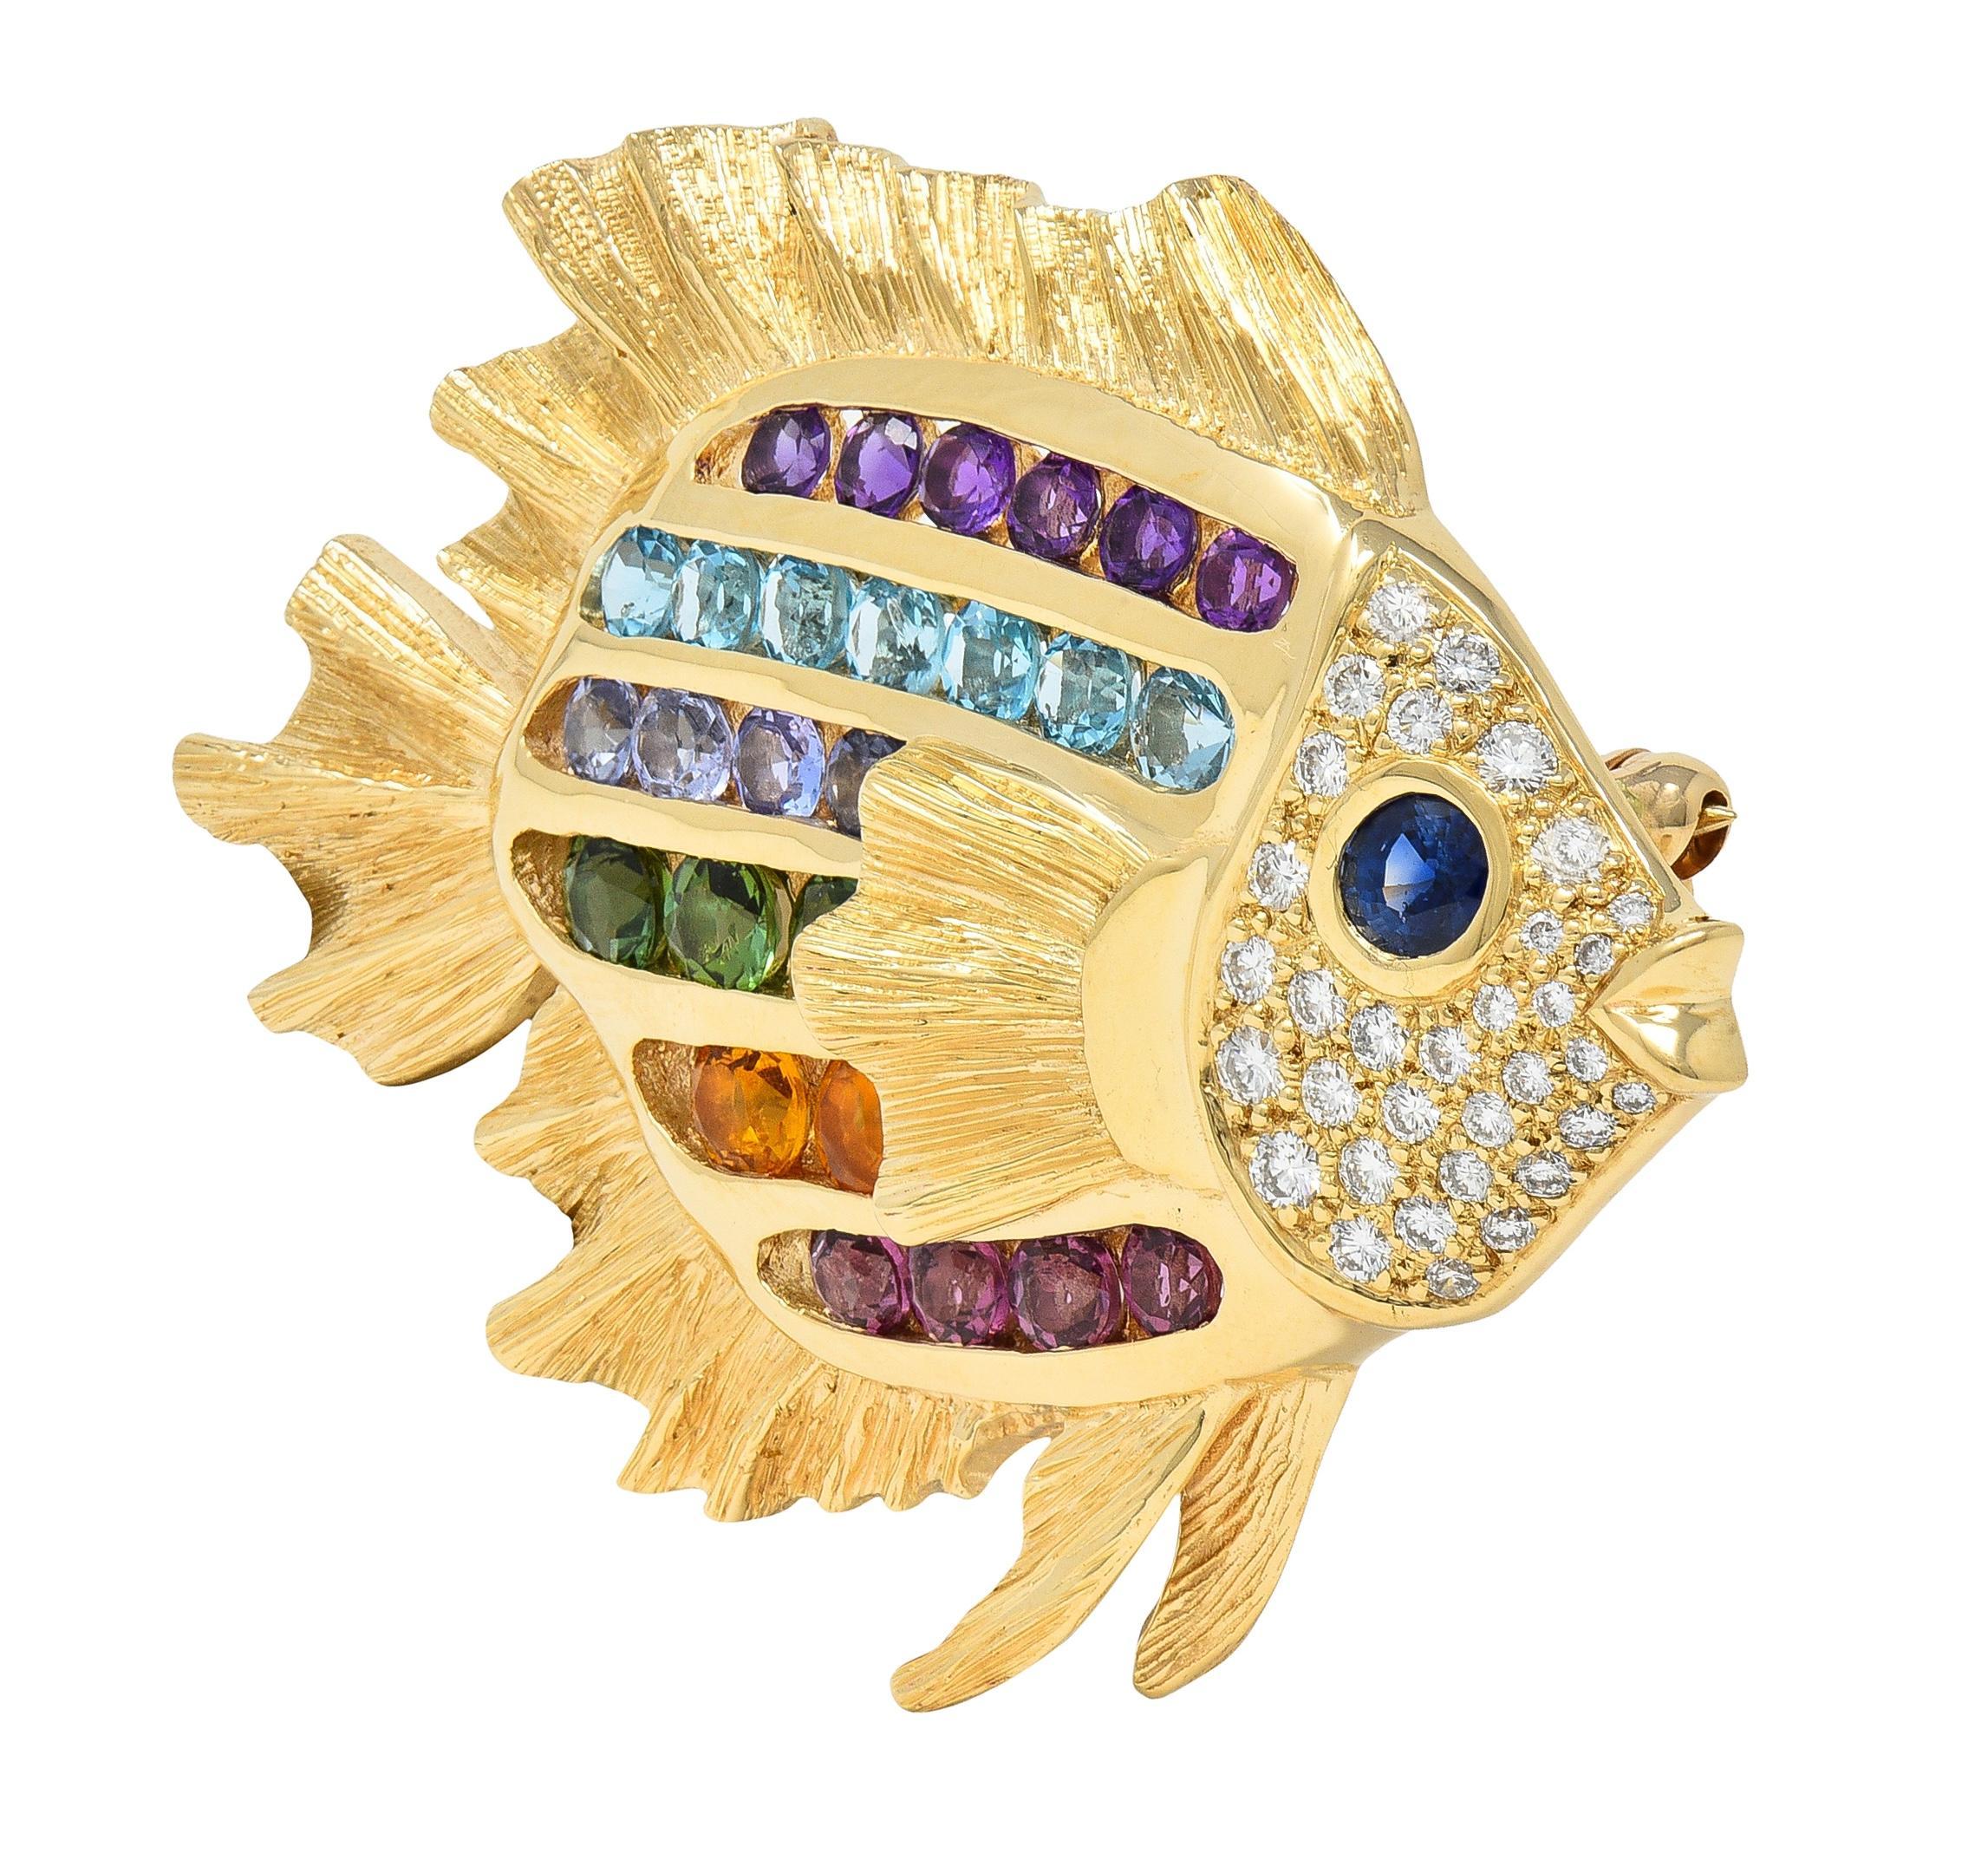 Designed as a stylized tropical fish with dimensional fins engraved with linear texture
Featuring stripes comprised of channel set round cut multi-gems
Transparent blue, purple, violet, orange, green and pink
Including topaz, amethyst, citrine, and